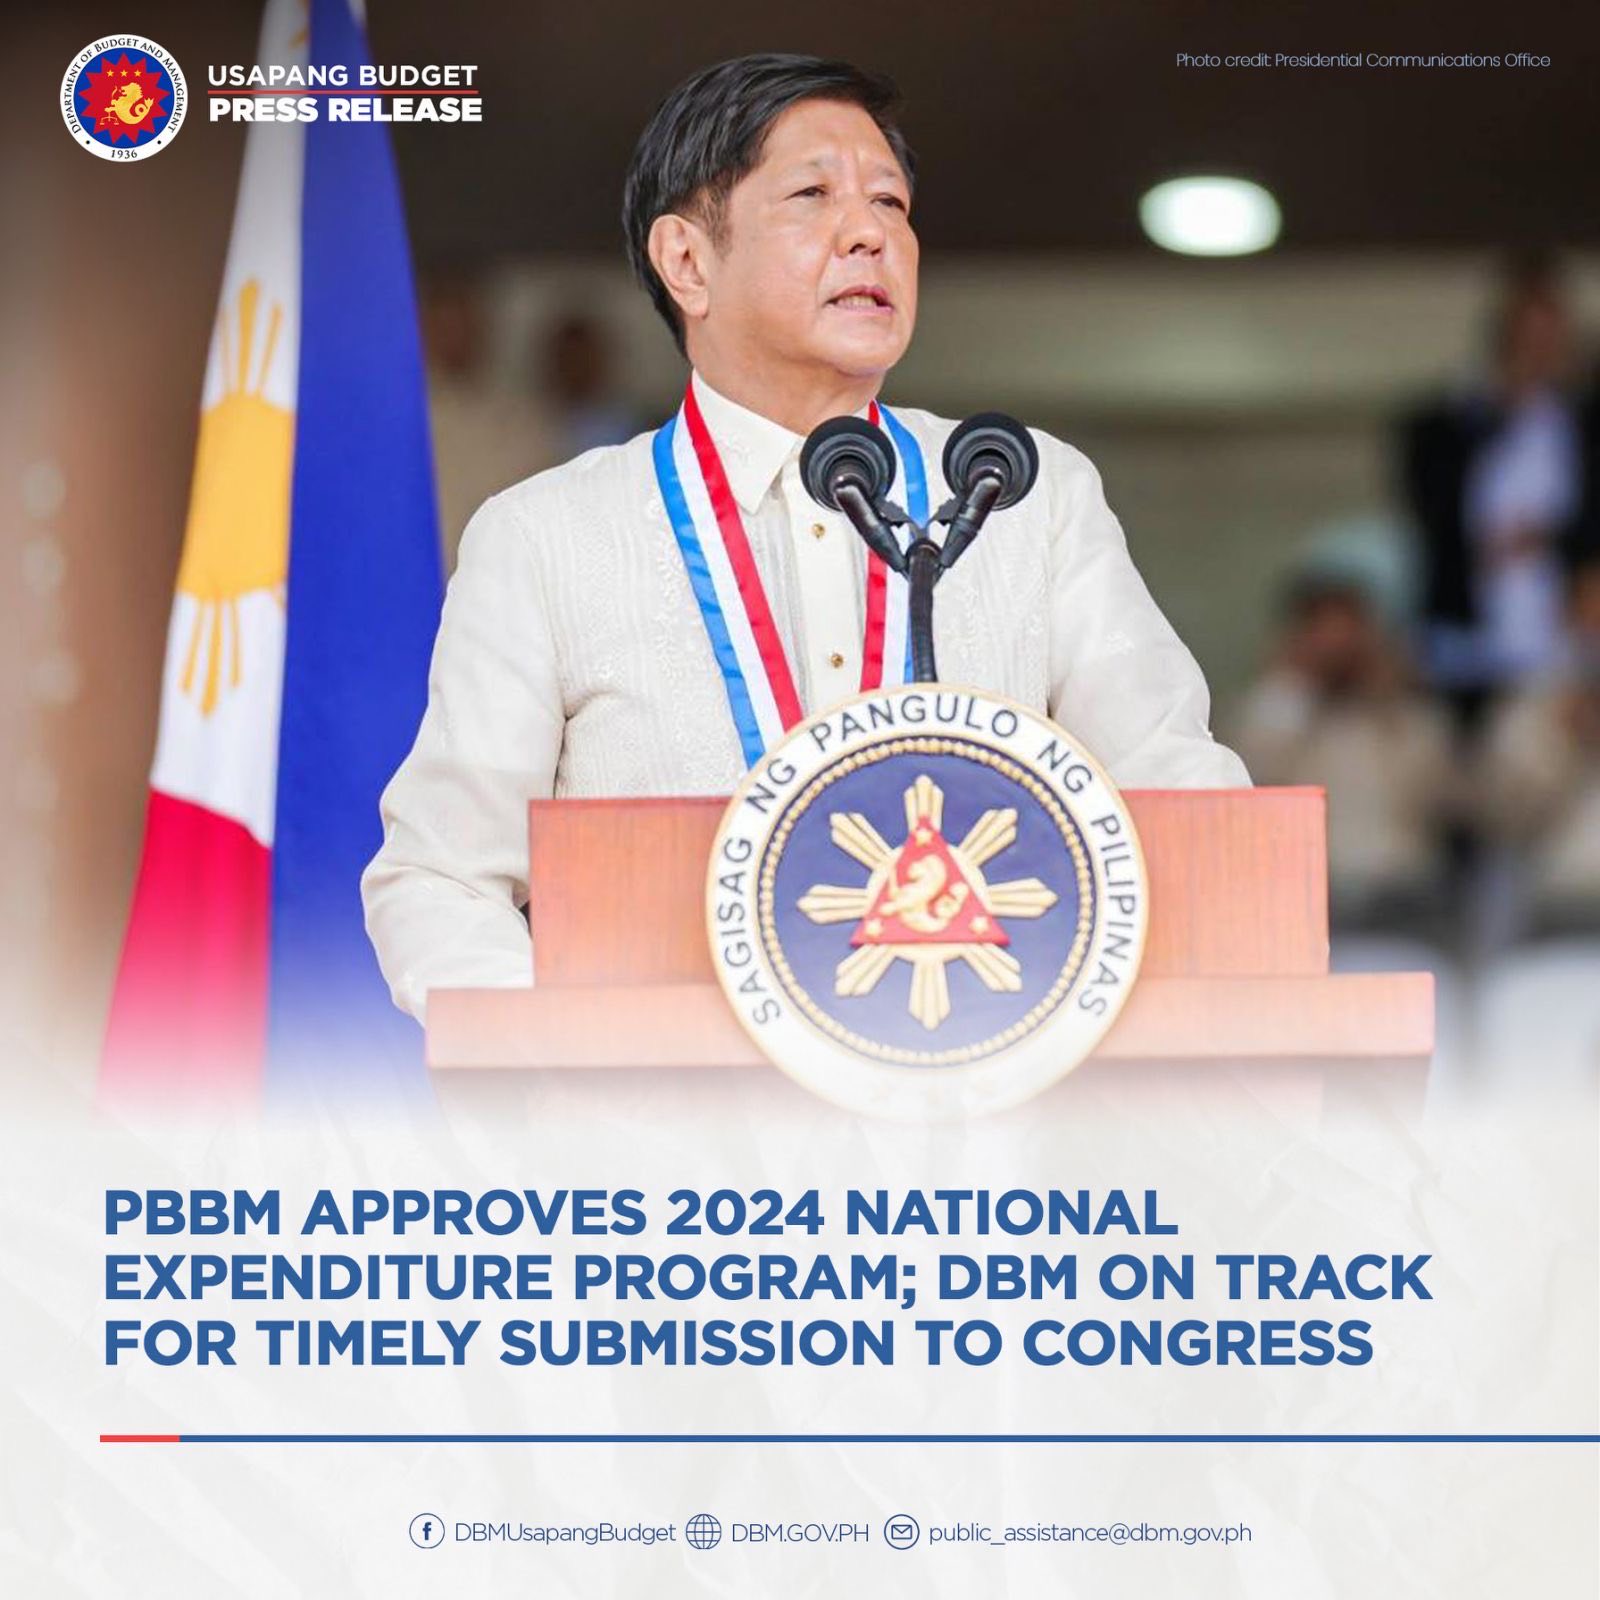 PIA PBBM approves 2024 NEP, DBM on track for timely submission to